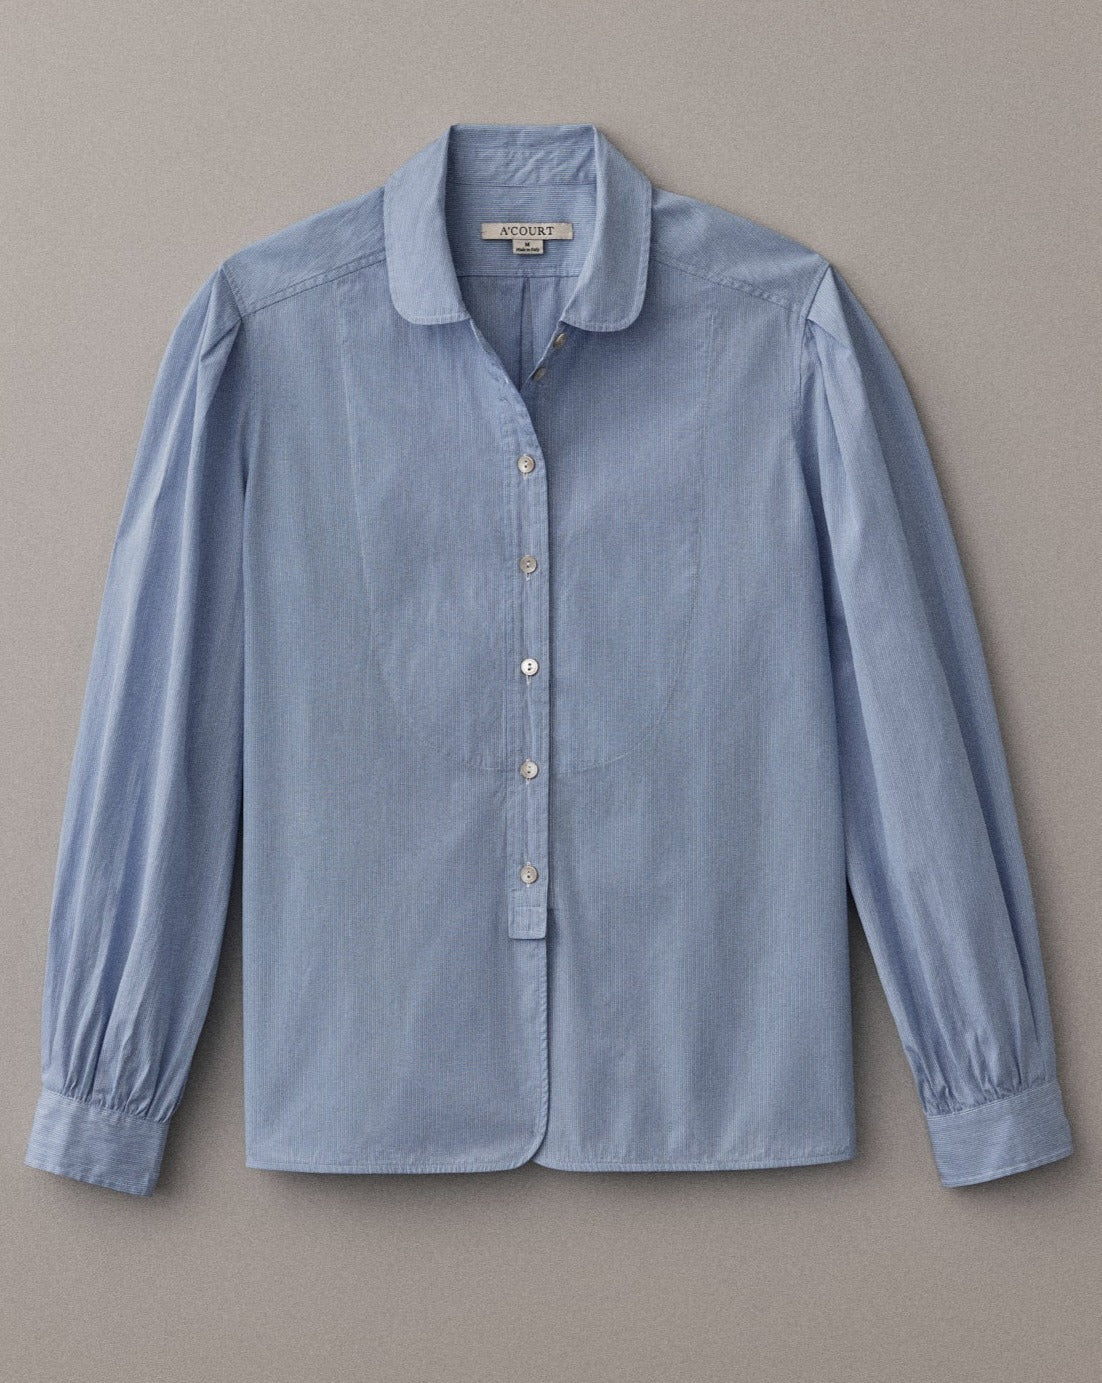 A long sleeve blouse in light blue cotton with a classic menswear silhouette lies flat on a light brown field.